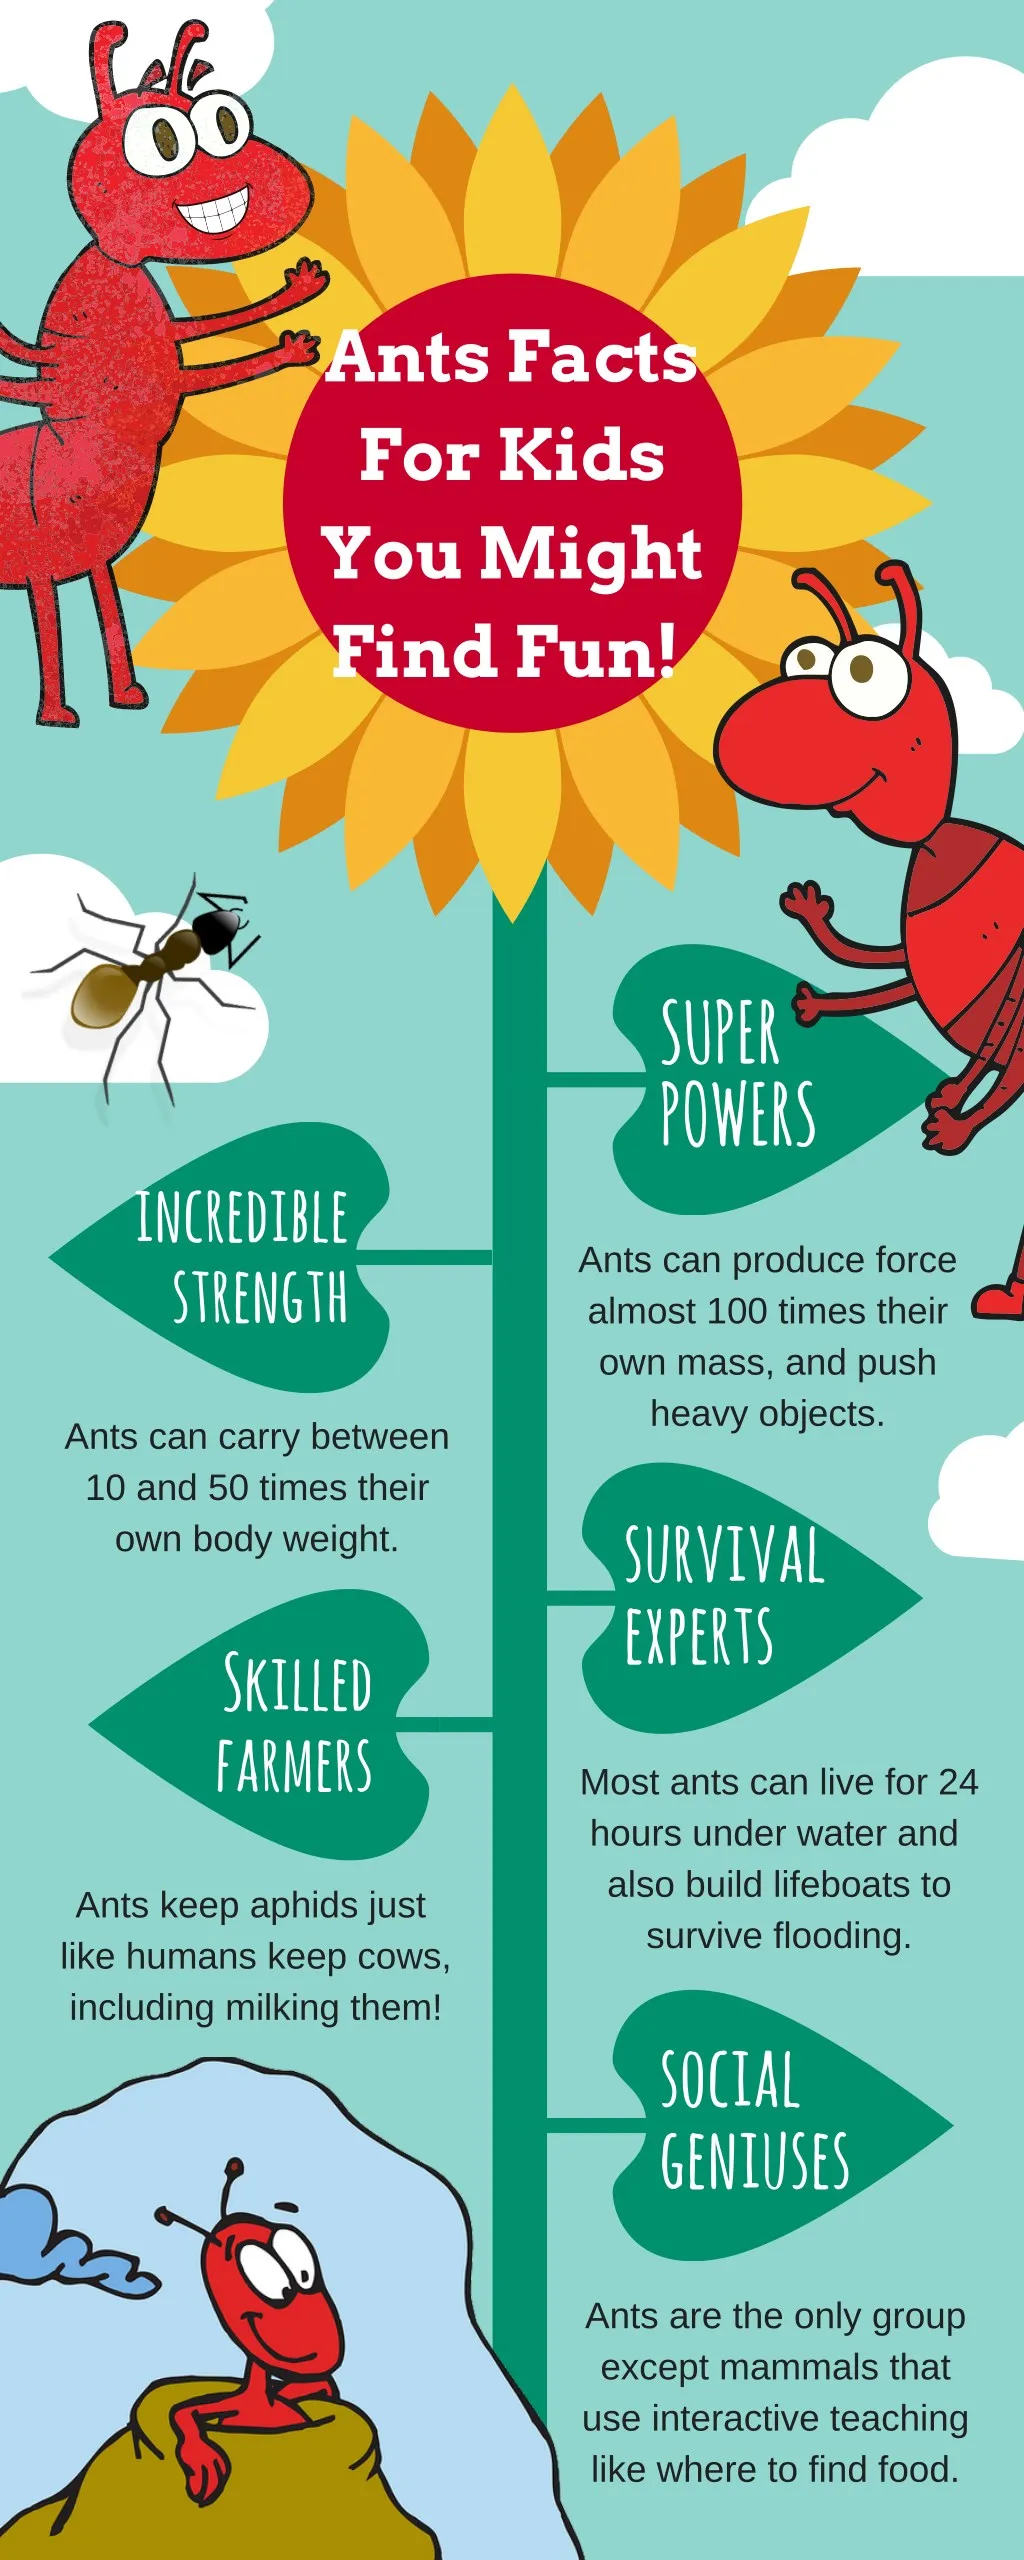 ants facts for kids you might find fun